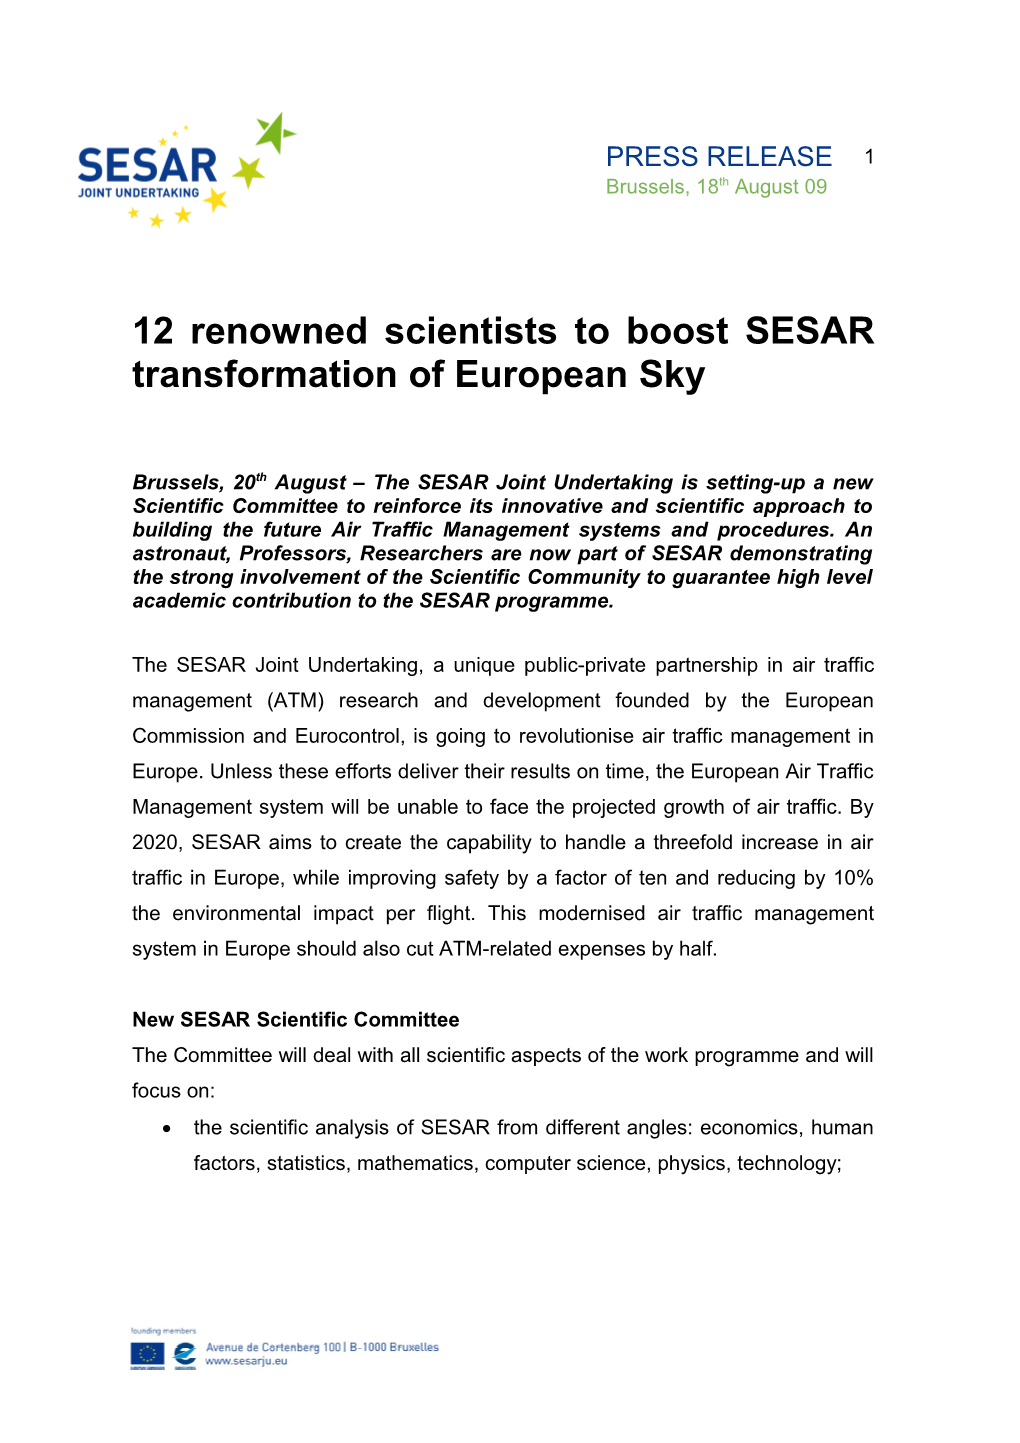 12 Renowned Scientists to Boost SESAR Transformation of European Sky